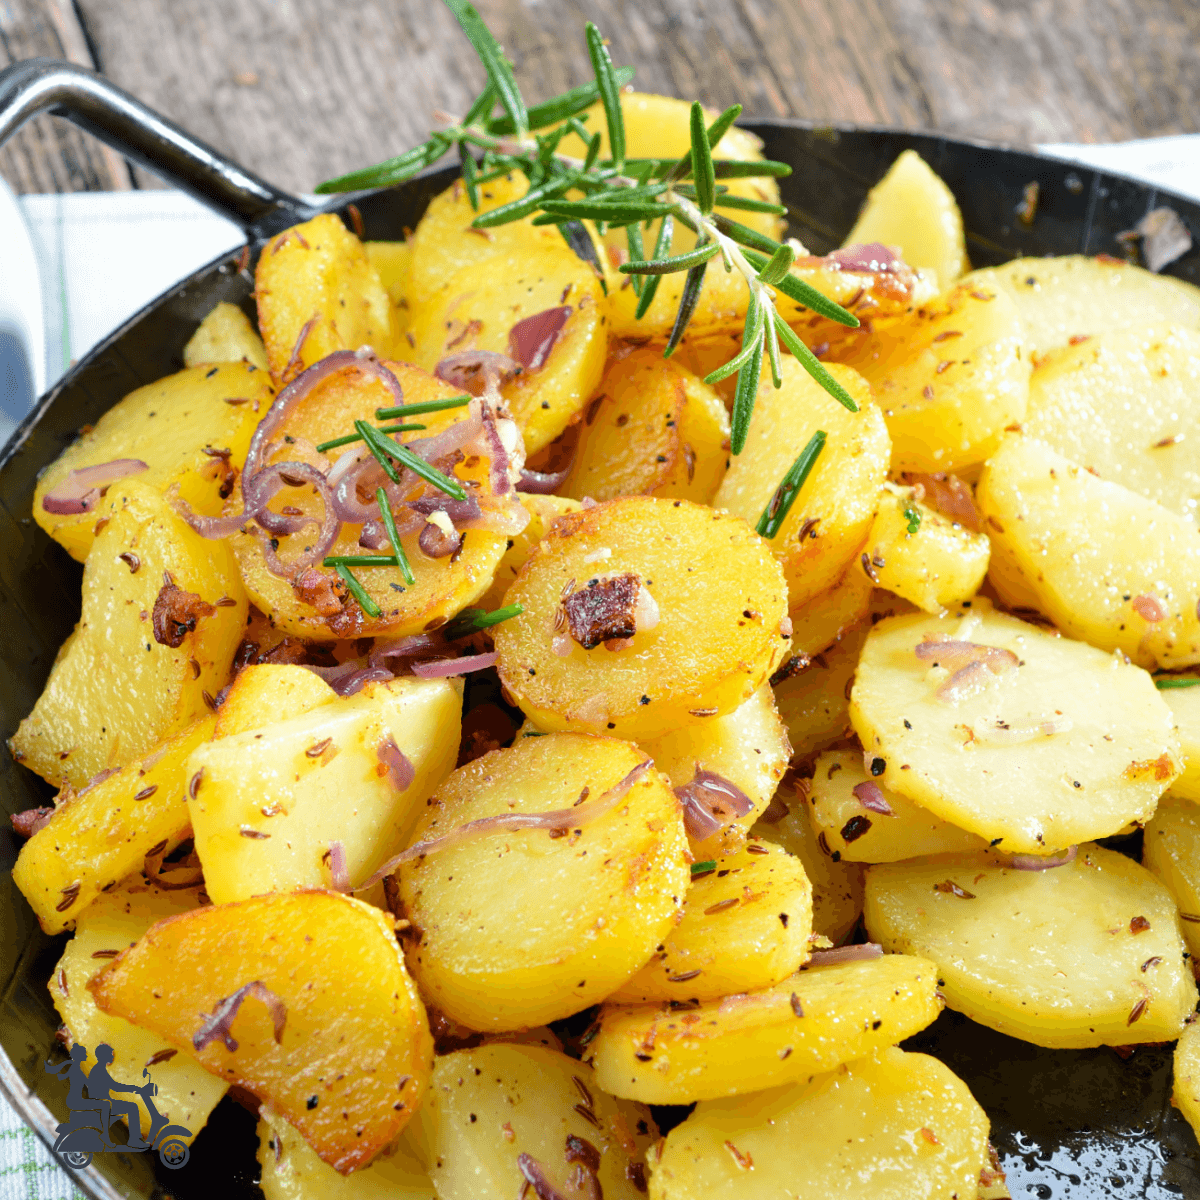 Skillet full of sliced potatoes that are fried and sprinkled with herbs. 